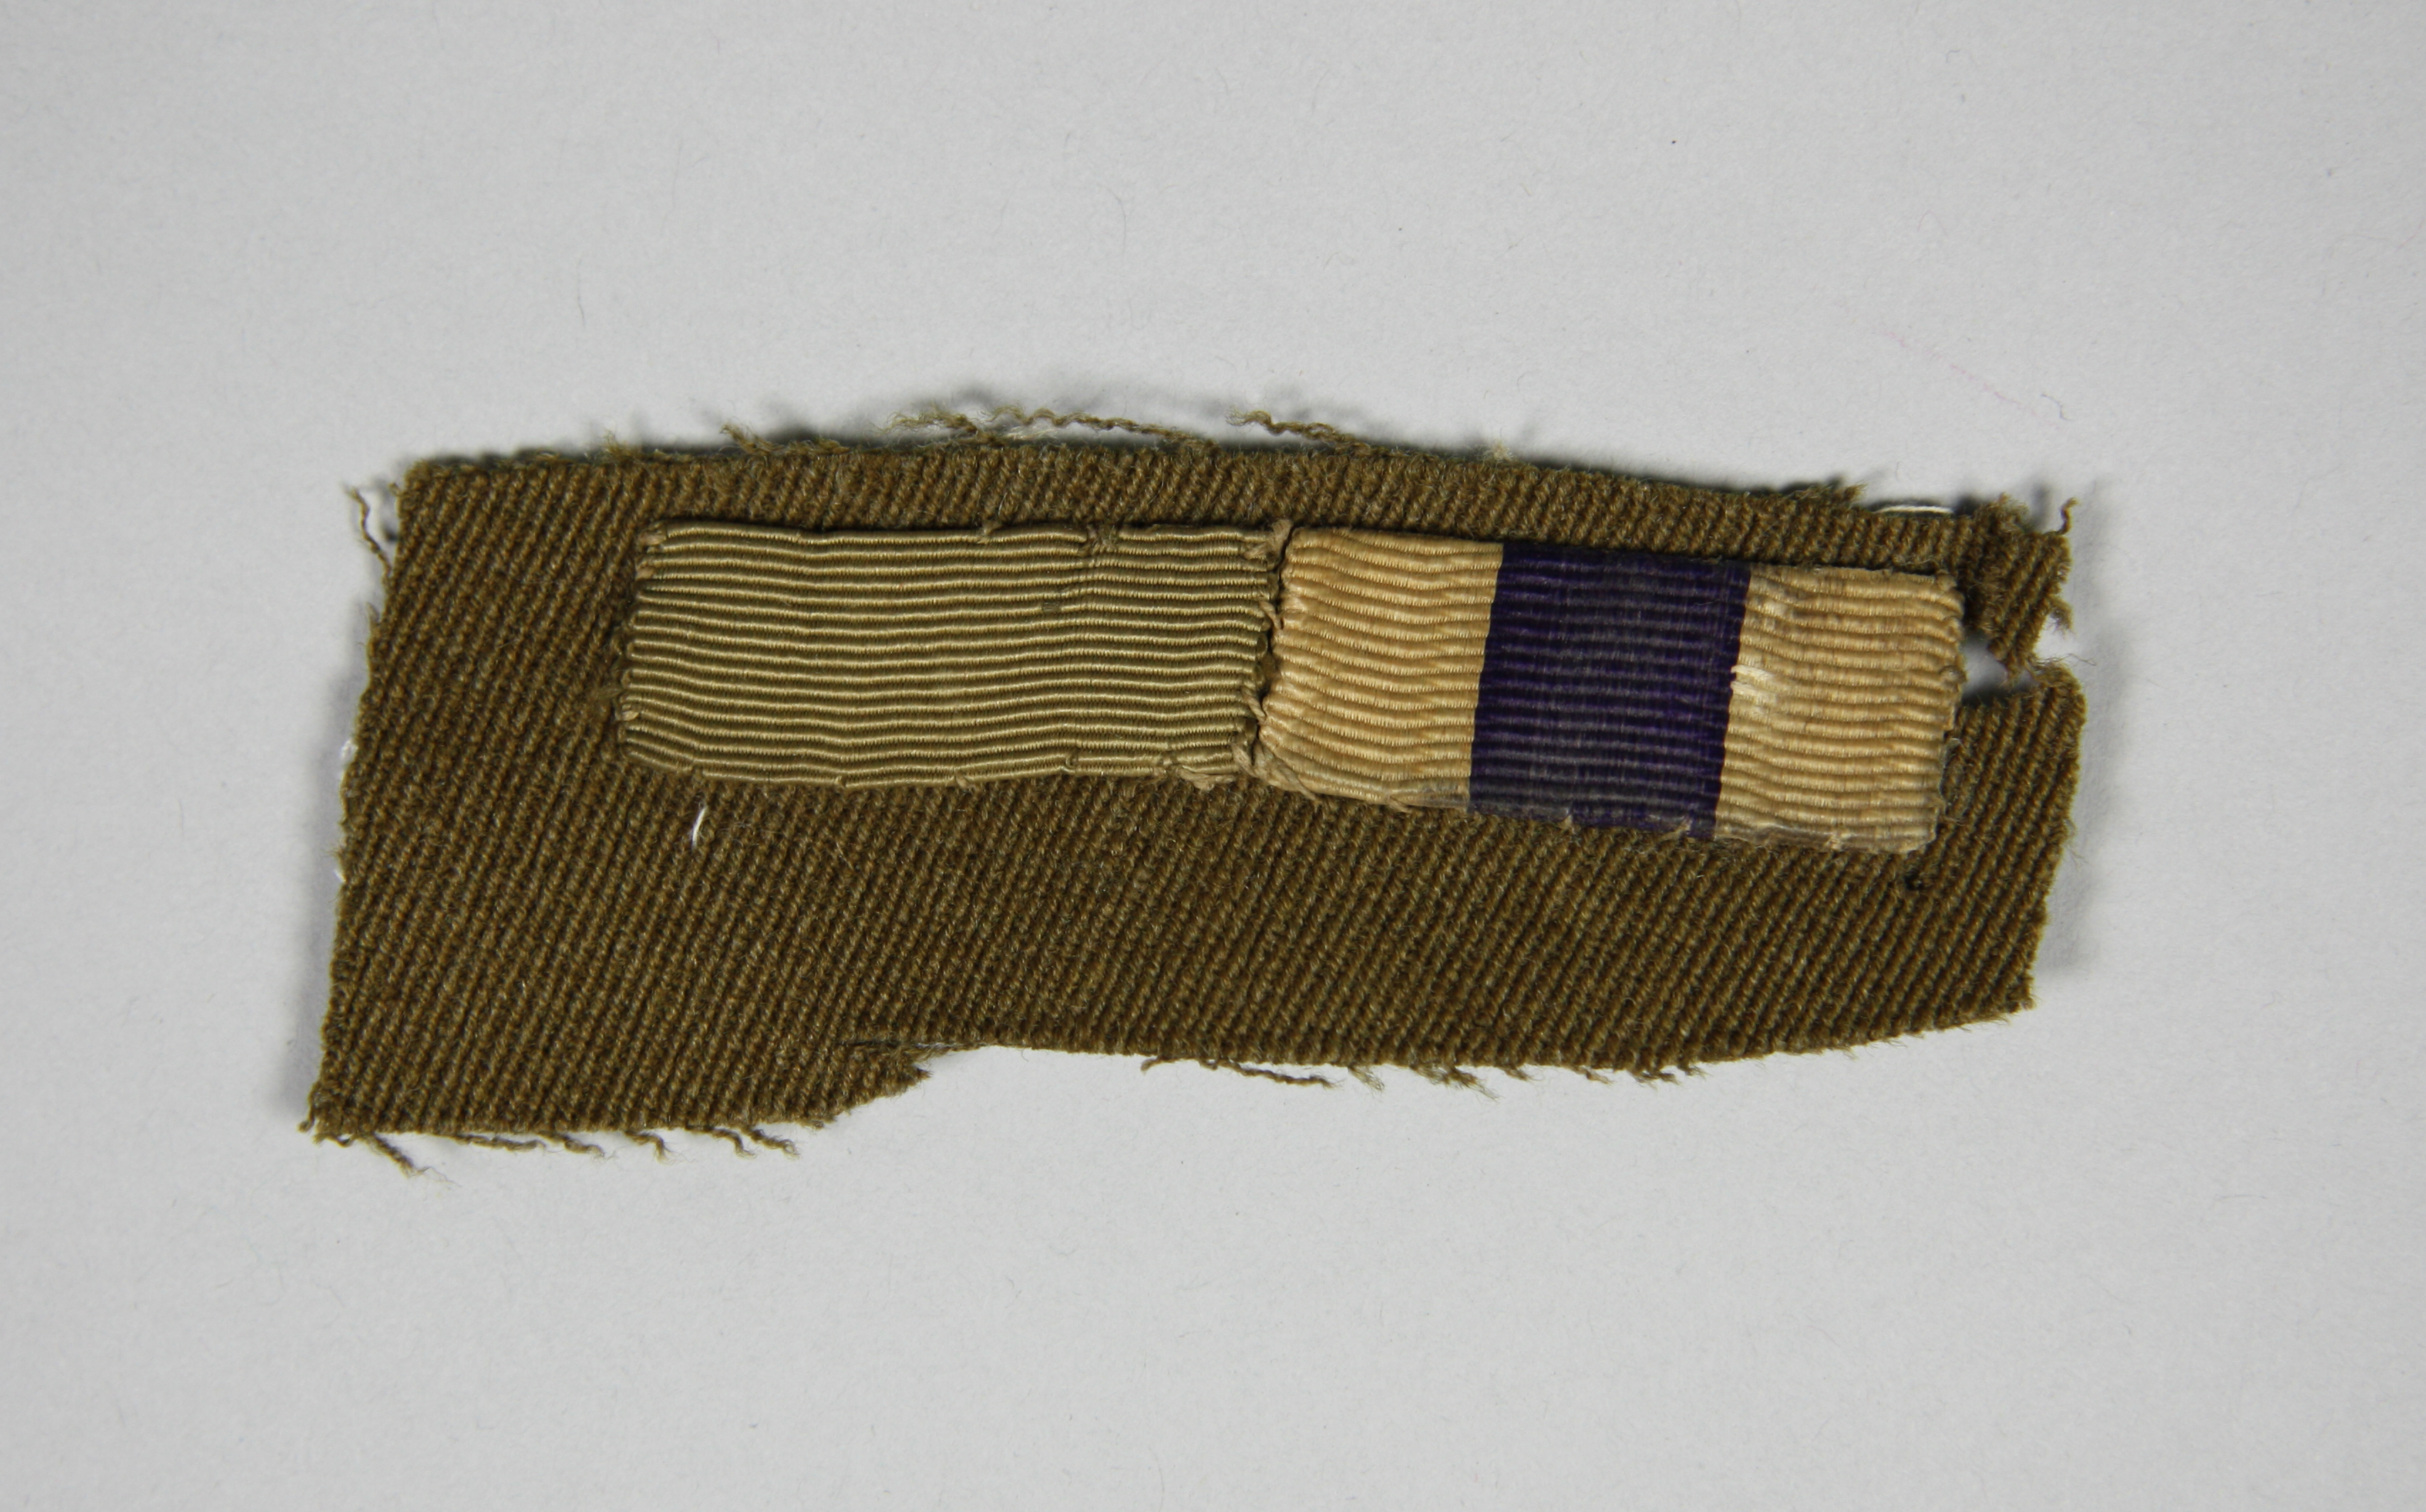 Officer’s medal stripes, 1914-1918, New Zealand, maker unknown. Gift of Marianne Abraham, 2010. CC BY-NC-ND licence. Te Papa (GH016807)